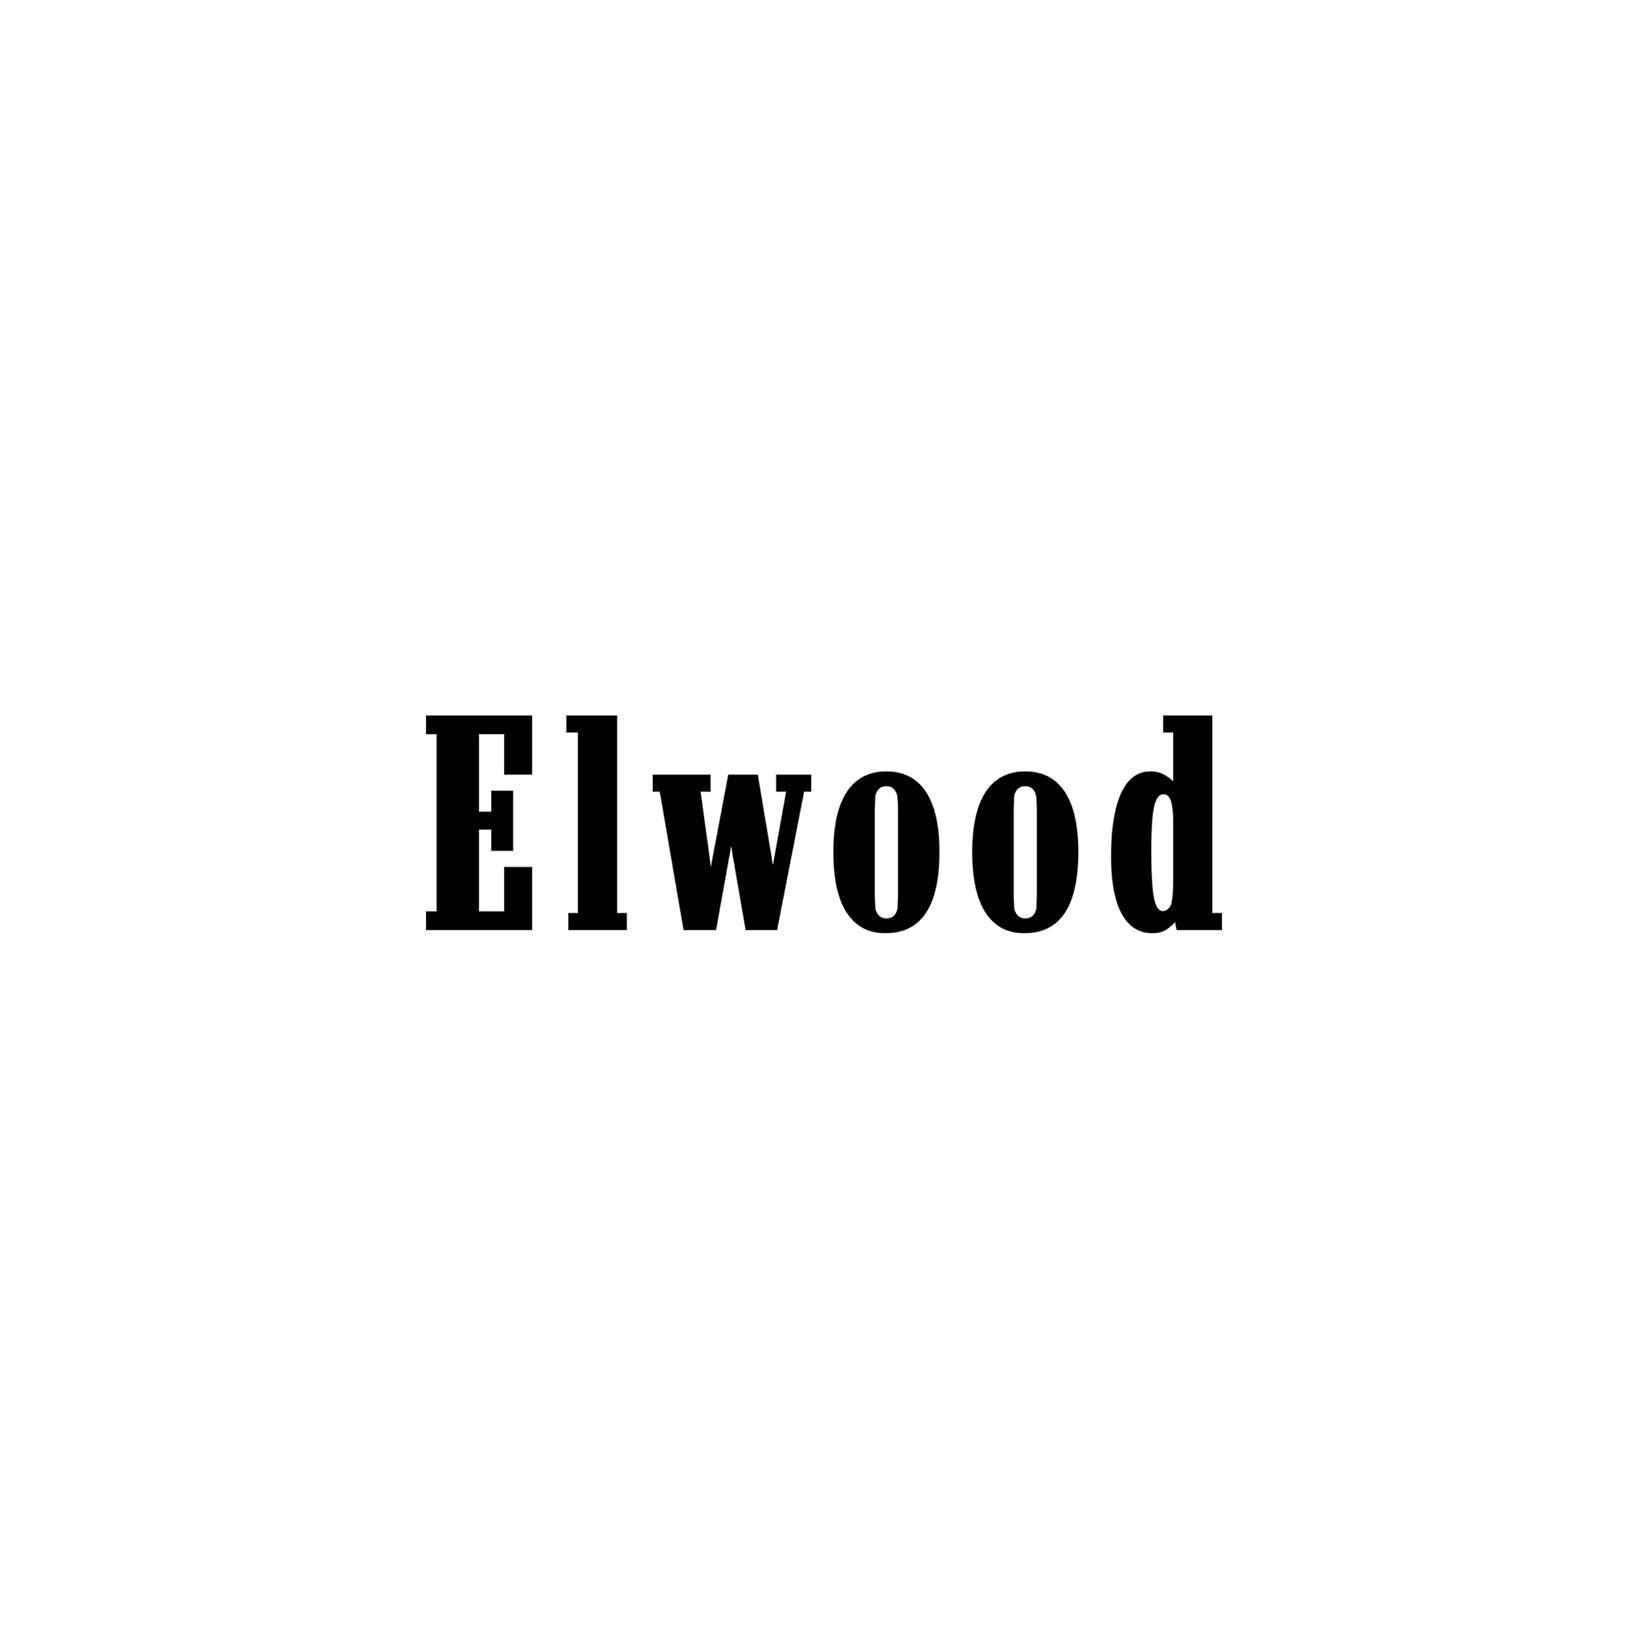 Elwood - Similar stores, new products, store review, Q&A | Modvisor